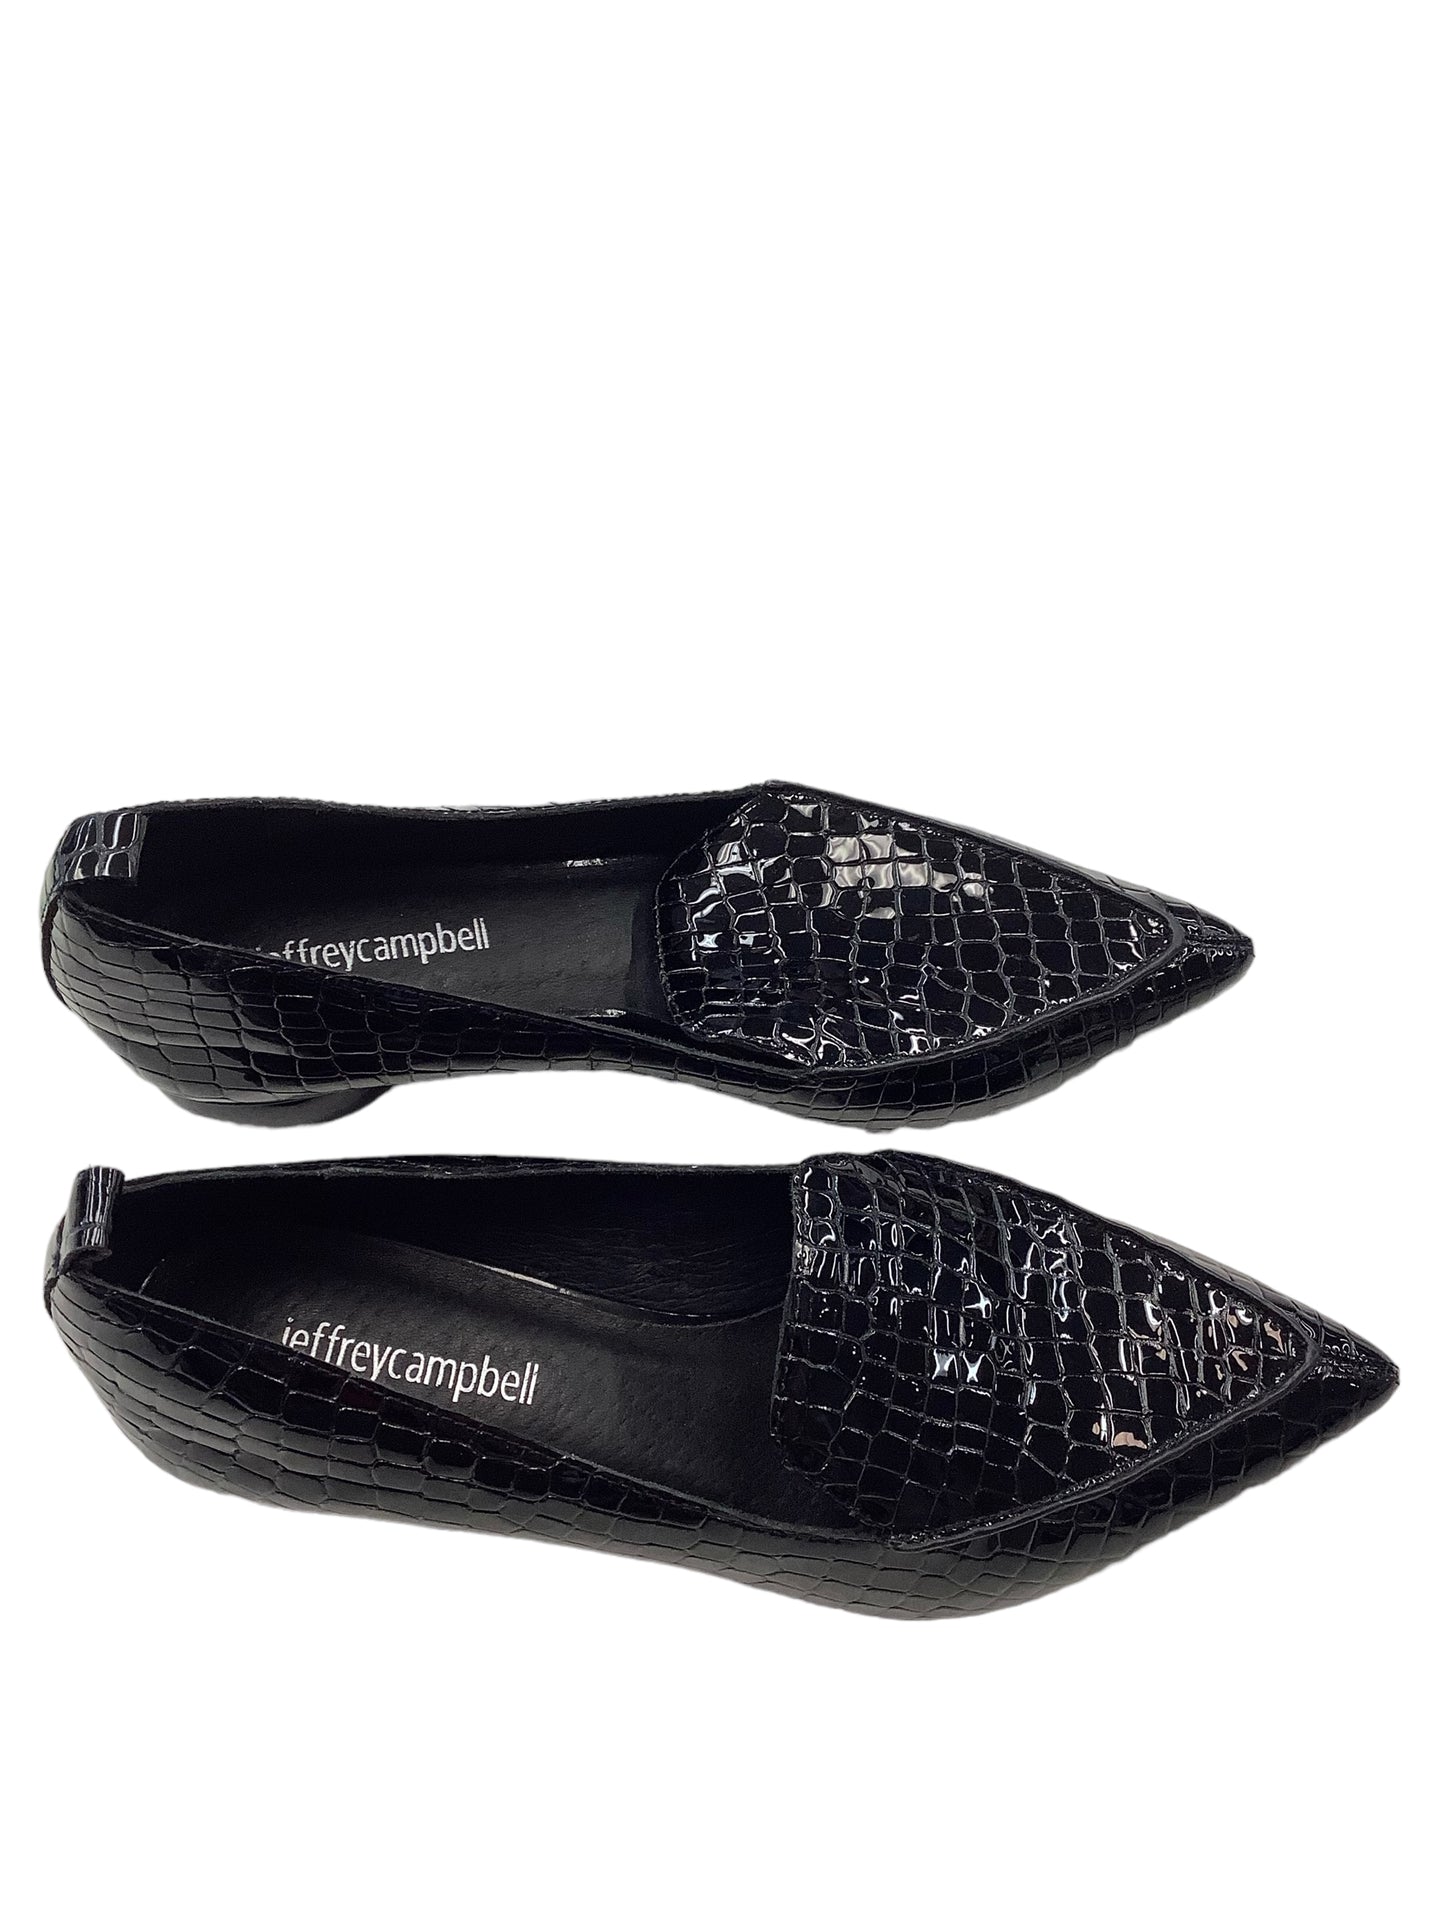 Shoes Flats Loafer Oxford By Jeffery Campbell  Size: 6.5